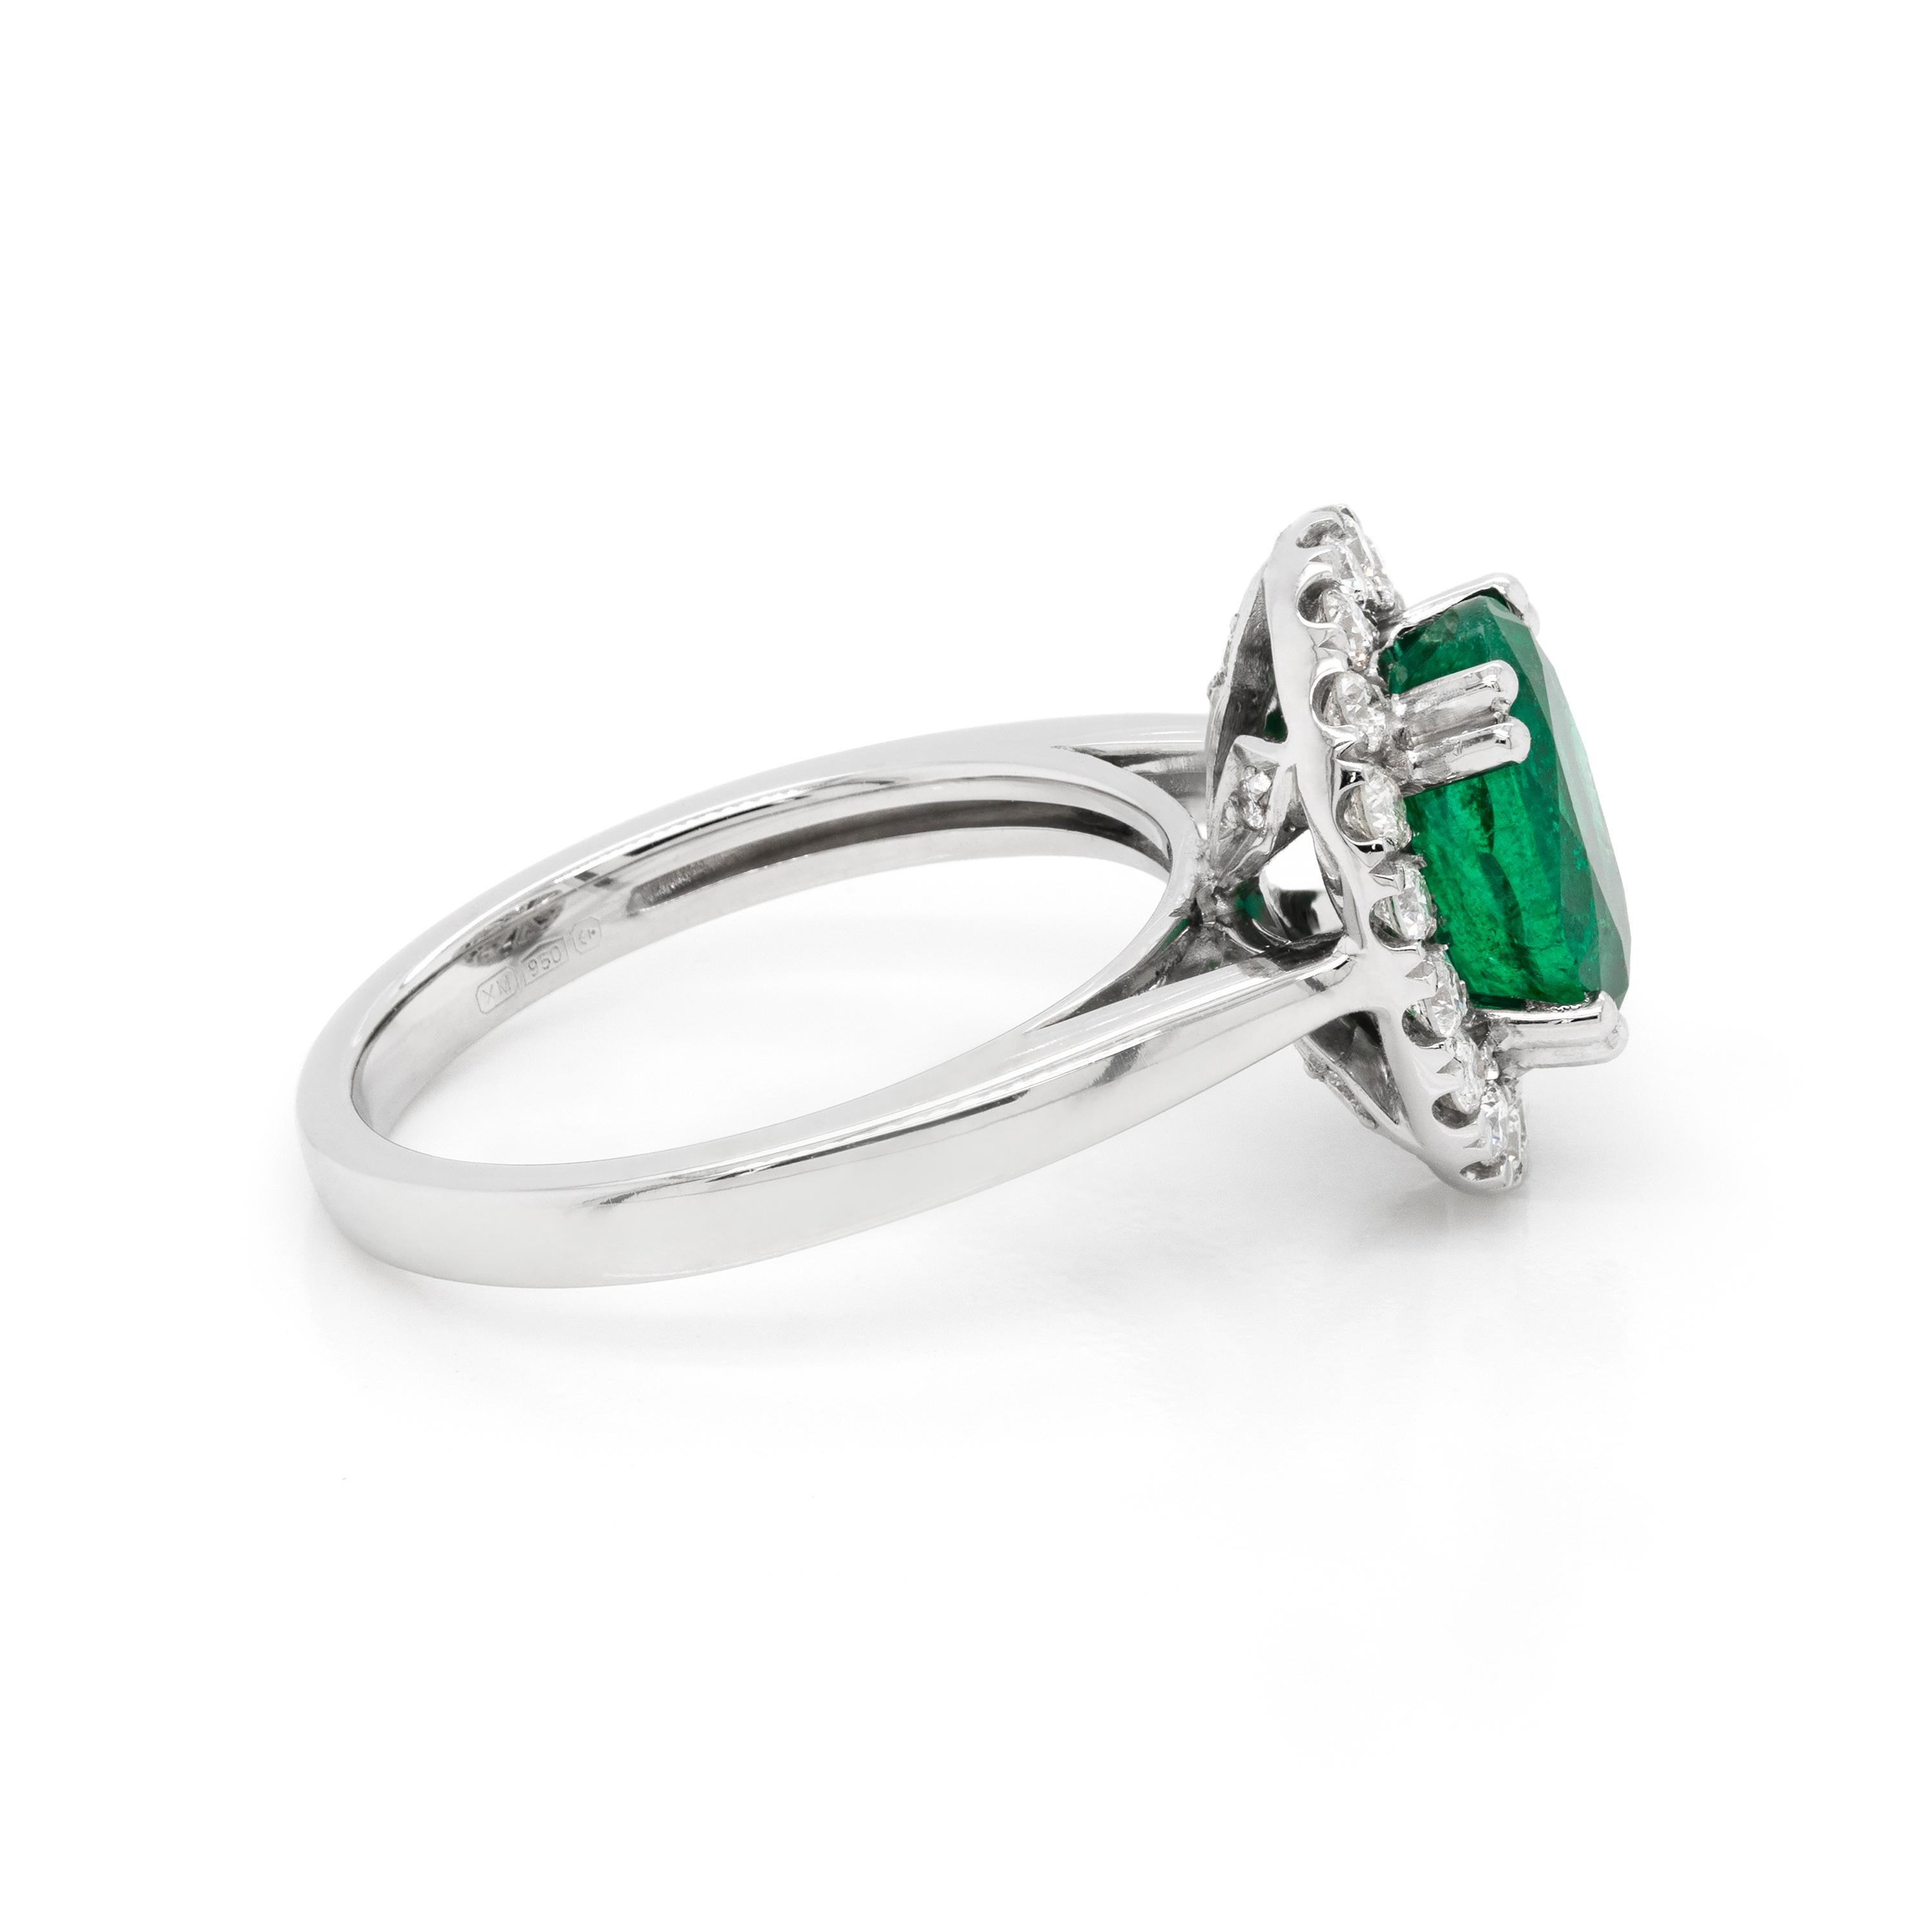 Lovely cluster engagement ring featuring a 1.83ct oval shaped emerald, in an open back, four double claw setting. The beautiful emerald is surrounded by a halo inlaid with eighteen claw set fine round brilliant cut diamonds with a total weight of